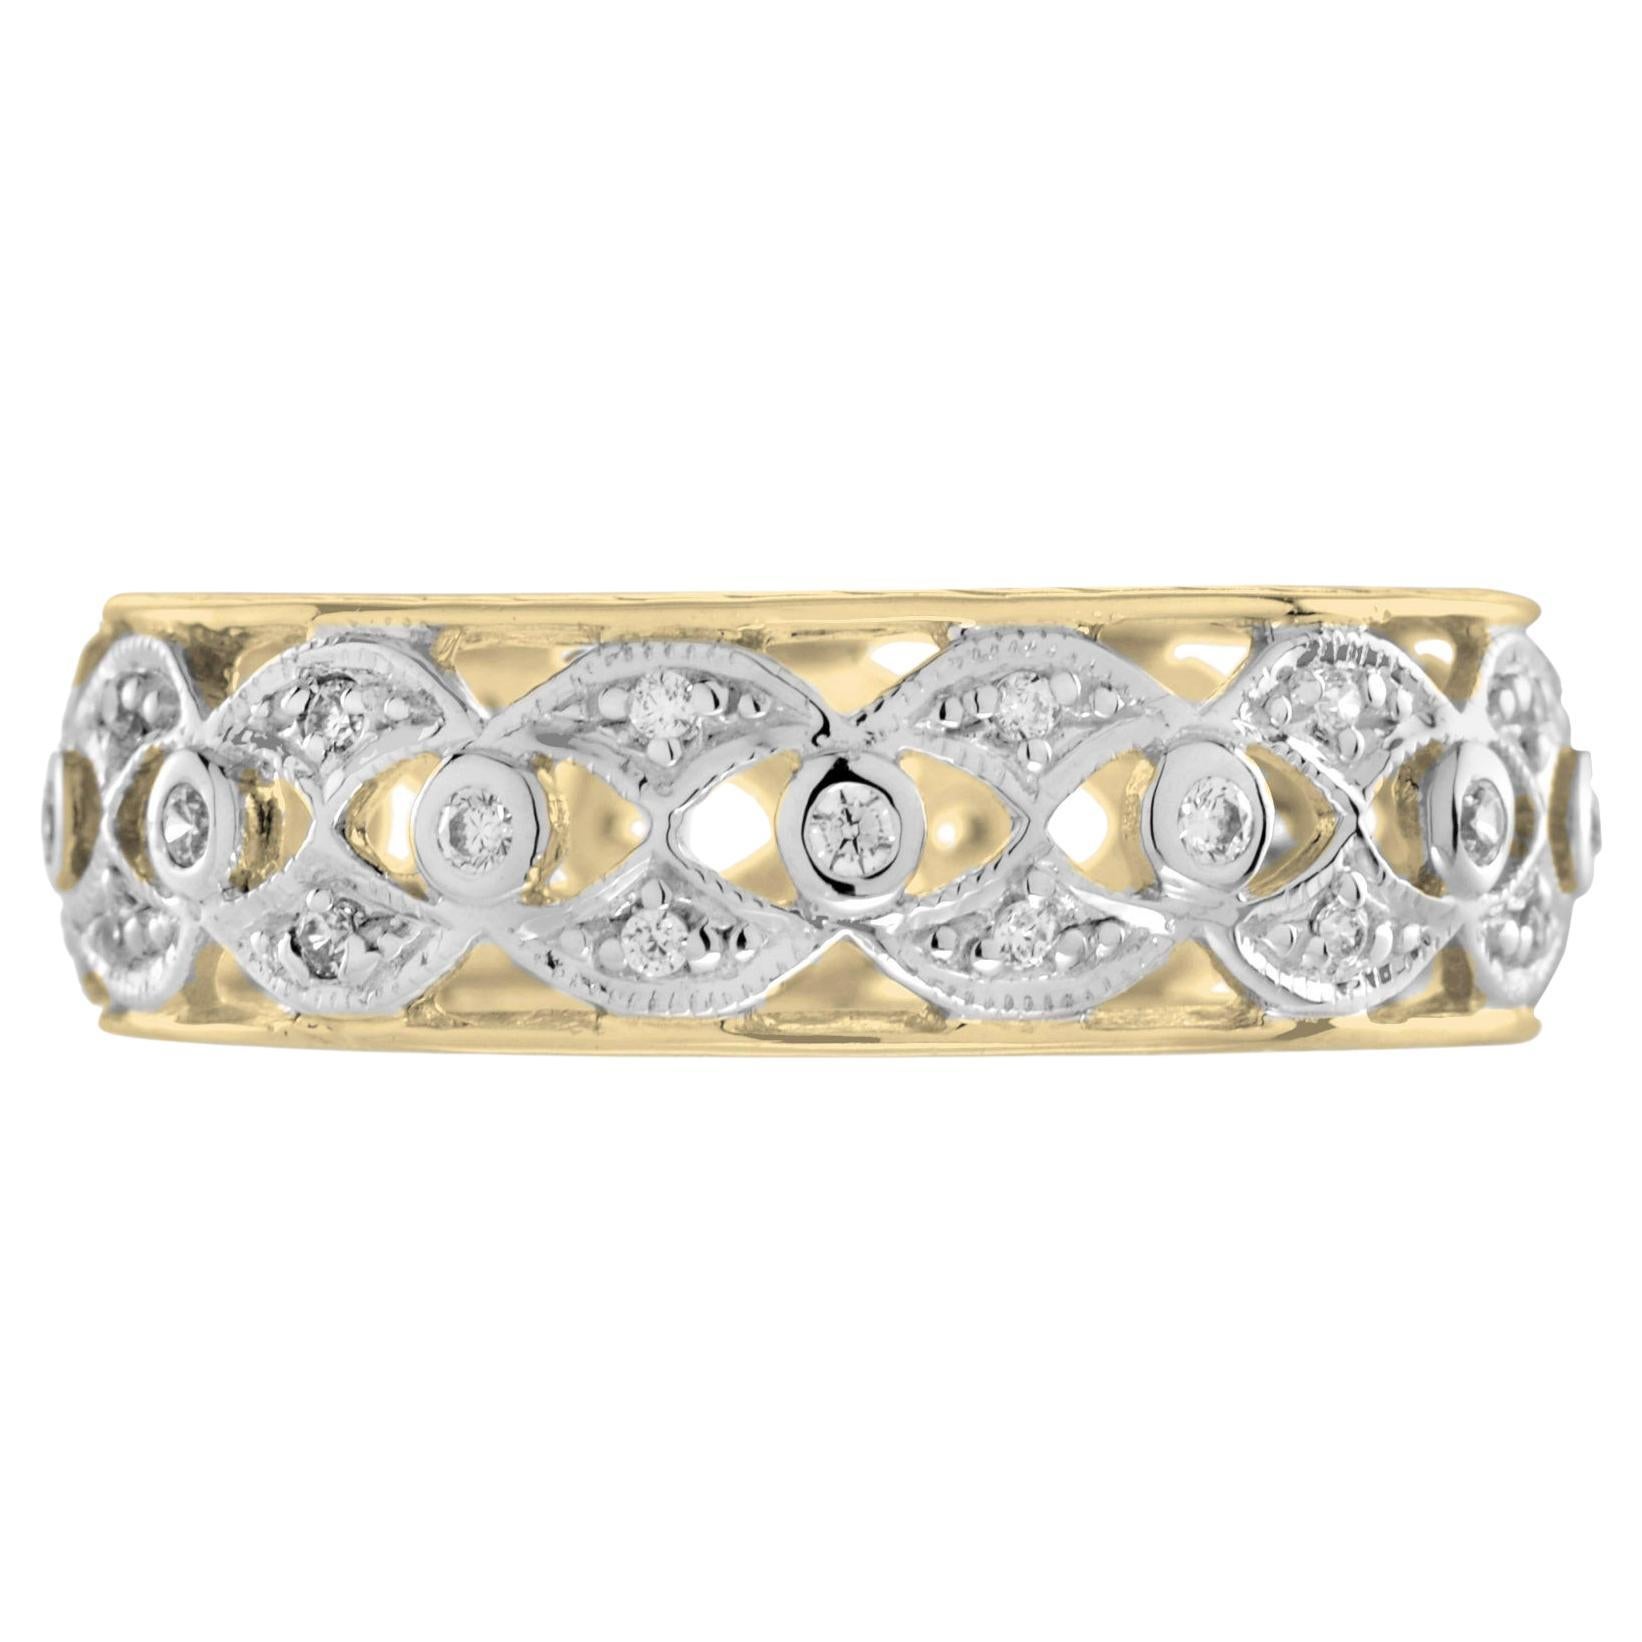 For Sale:  Art Deco Style Diamond Floral Filigree Eternity Band Ring in 14K Yellow Gold